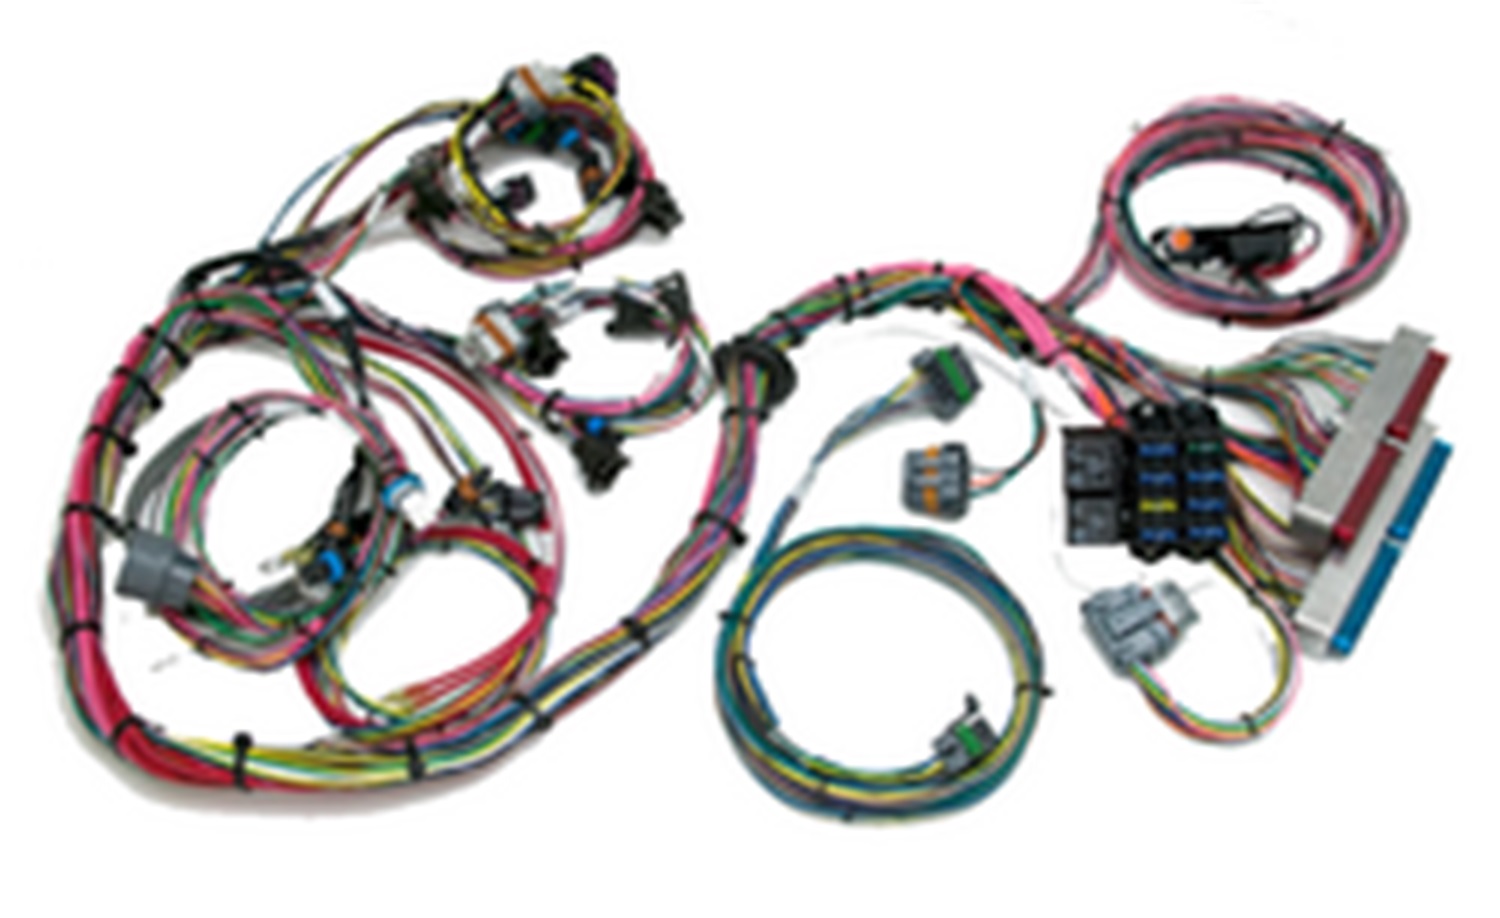 Painless Wiring Painless Wiring 60523 GM LS1 Fuel Injection Harness Fits 97-04 Camaro Corvette